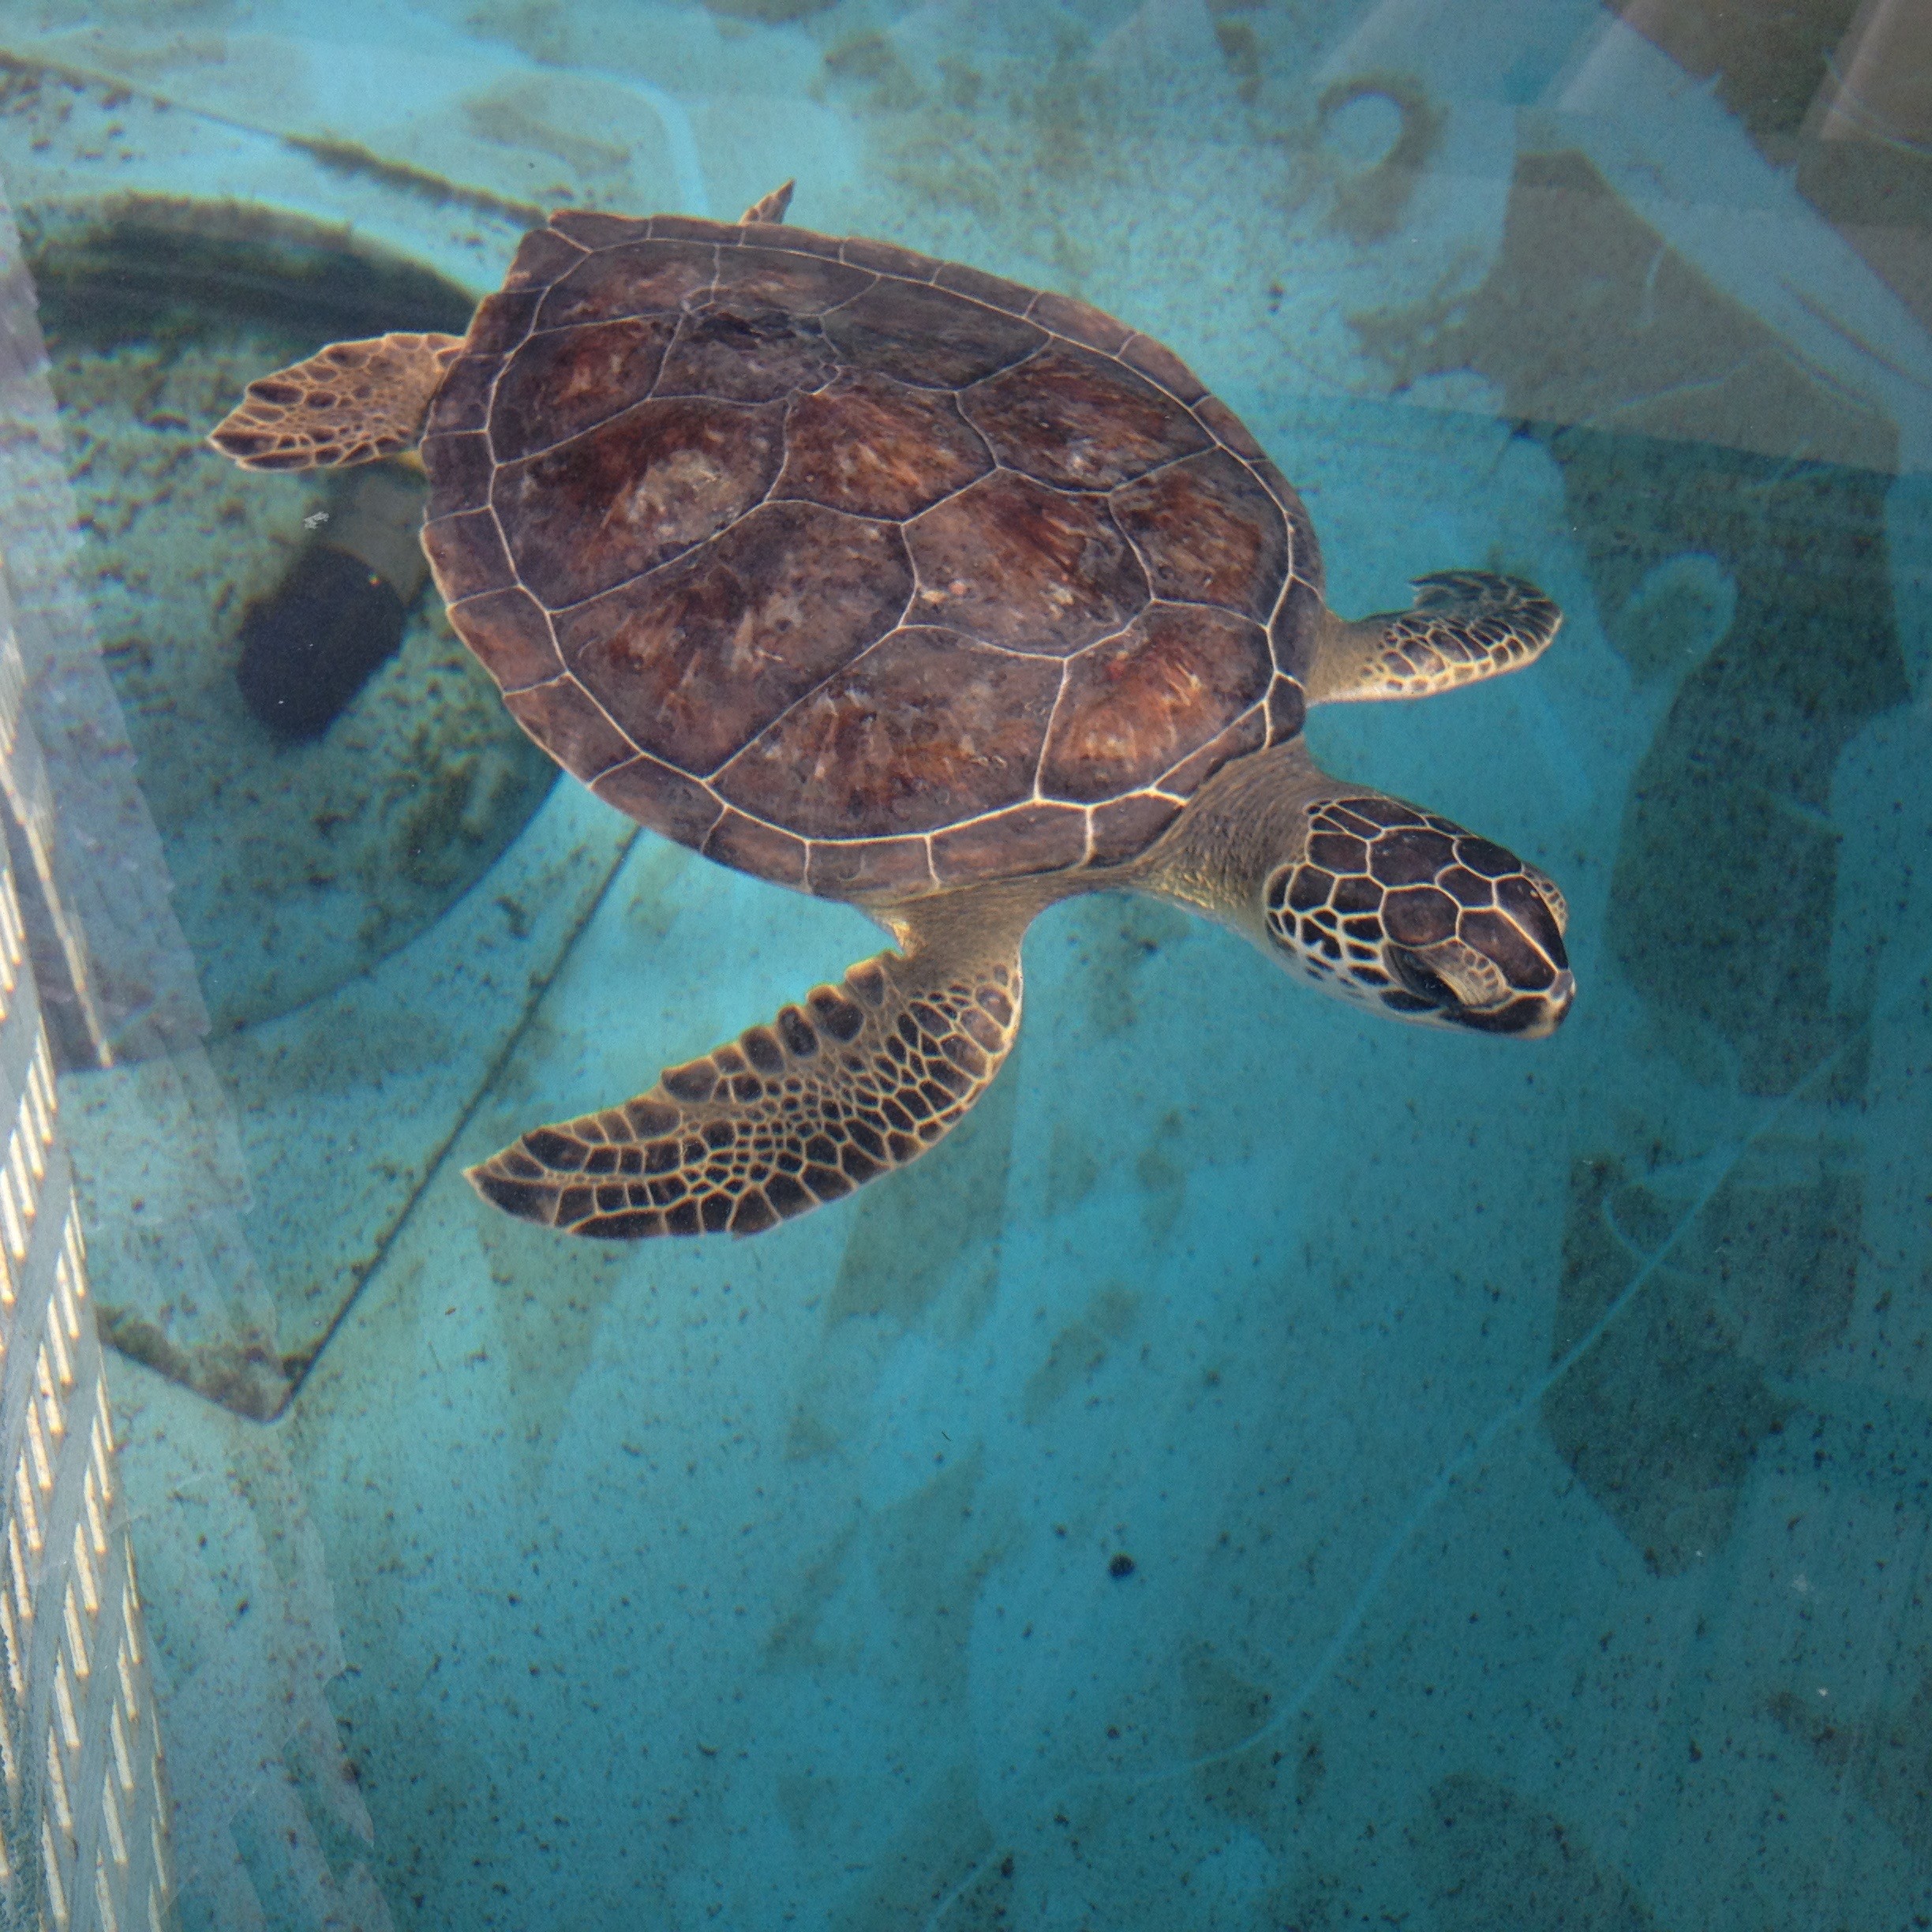 Micklers, a juvenile green sea turtle, was released on Jan. 21 becoming the first rehabilitated sea turtle to be released from The Sea Turtle Hospital at Whitney Laboratory since its opening in October 2015.